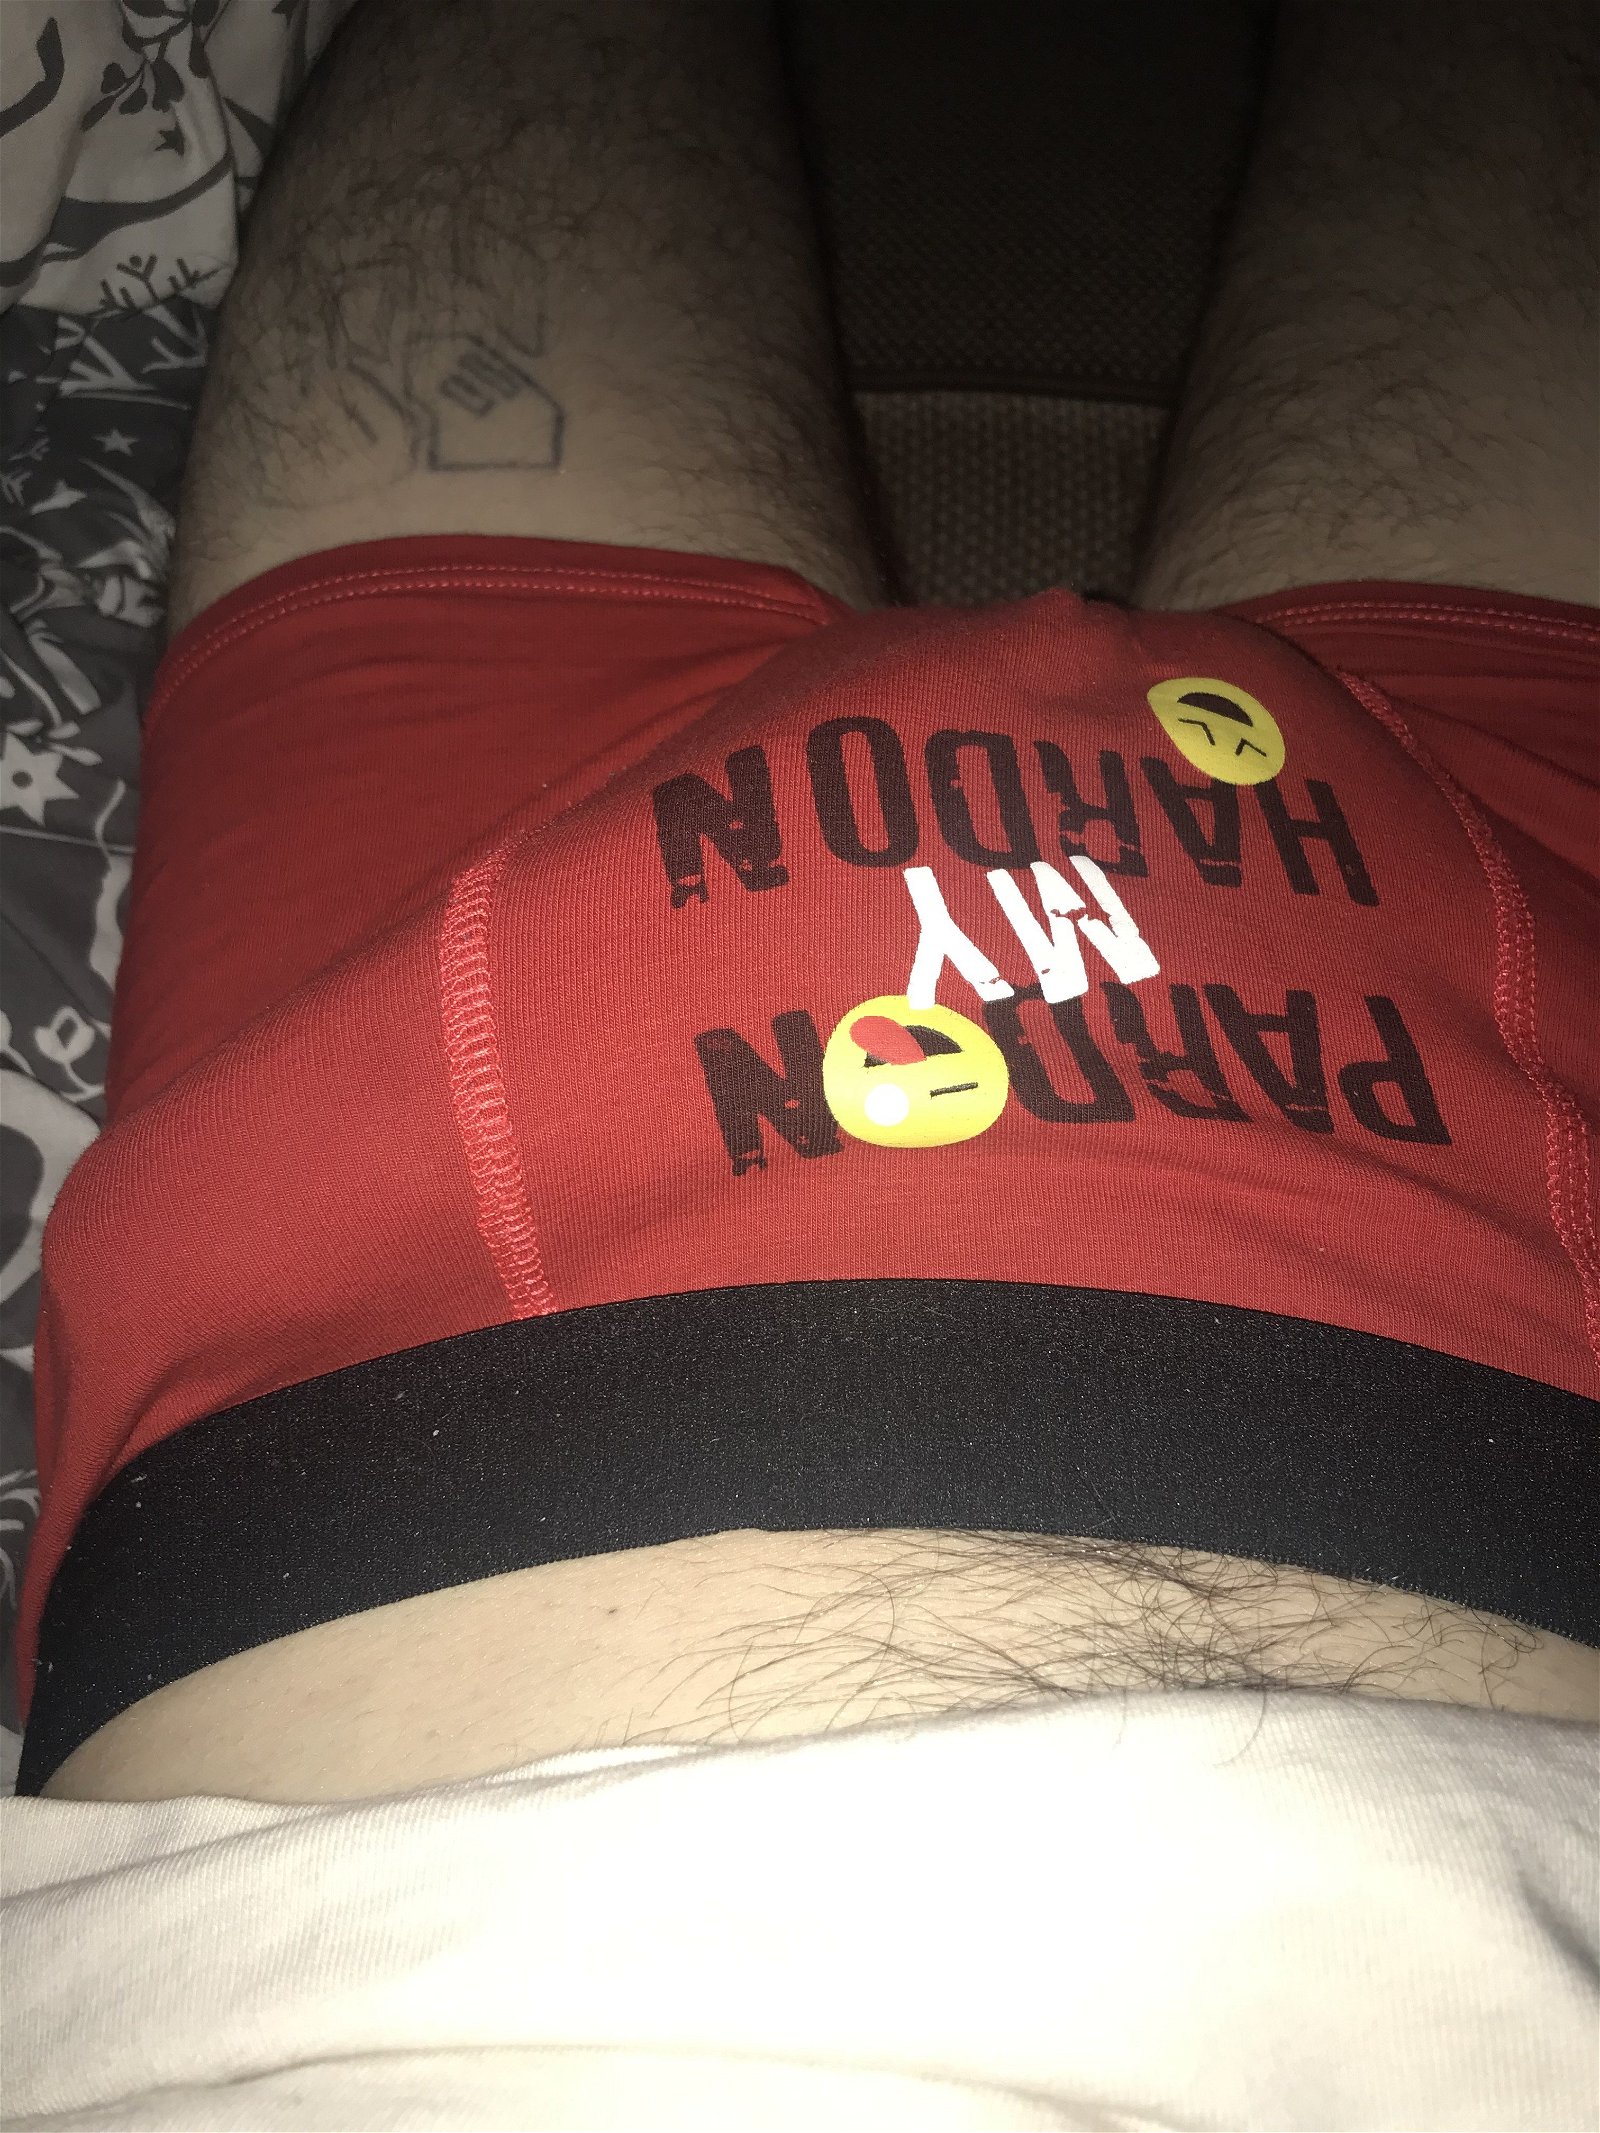 Photo by Dirtyscot8 with the username @Dirtyscot8,  June 27, 2022 at 8:38 AM. The post is about the topic Rate My Amateur Dick